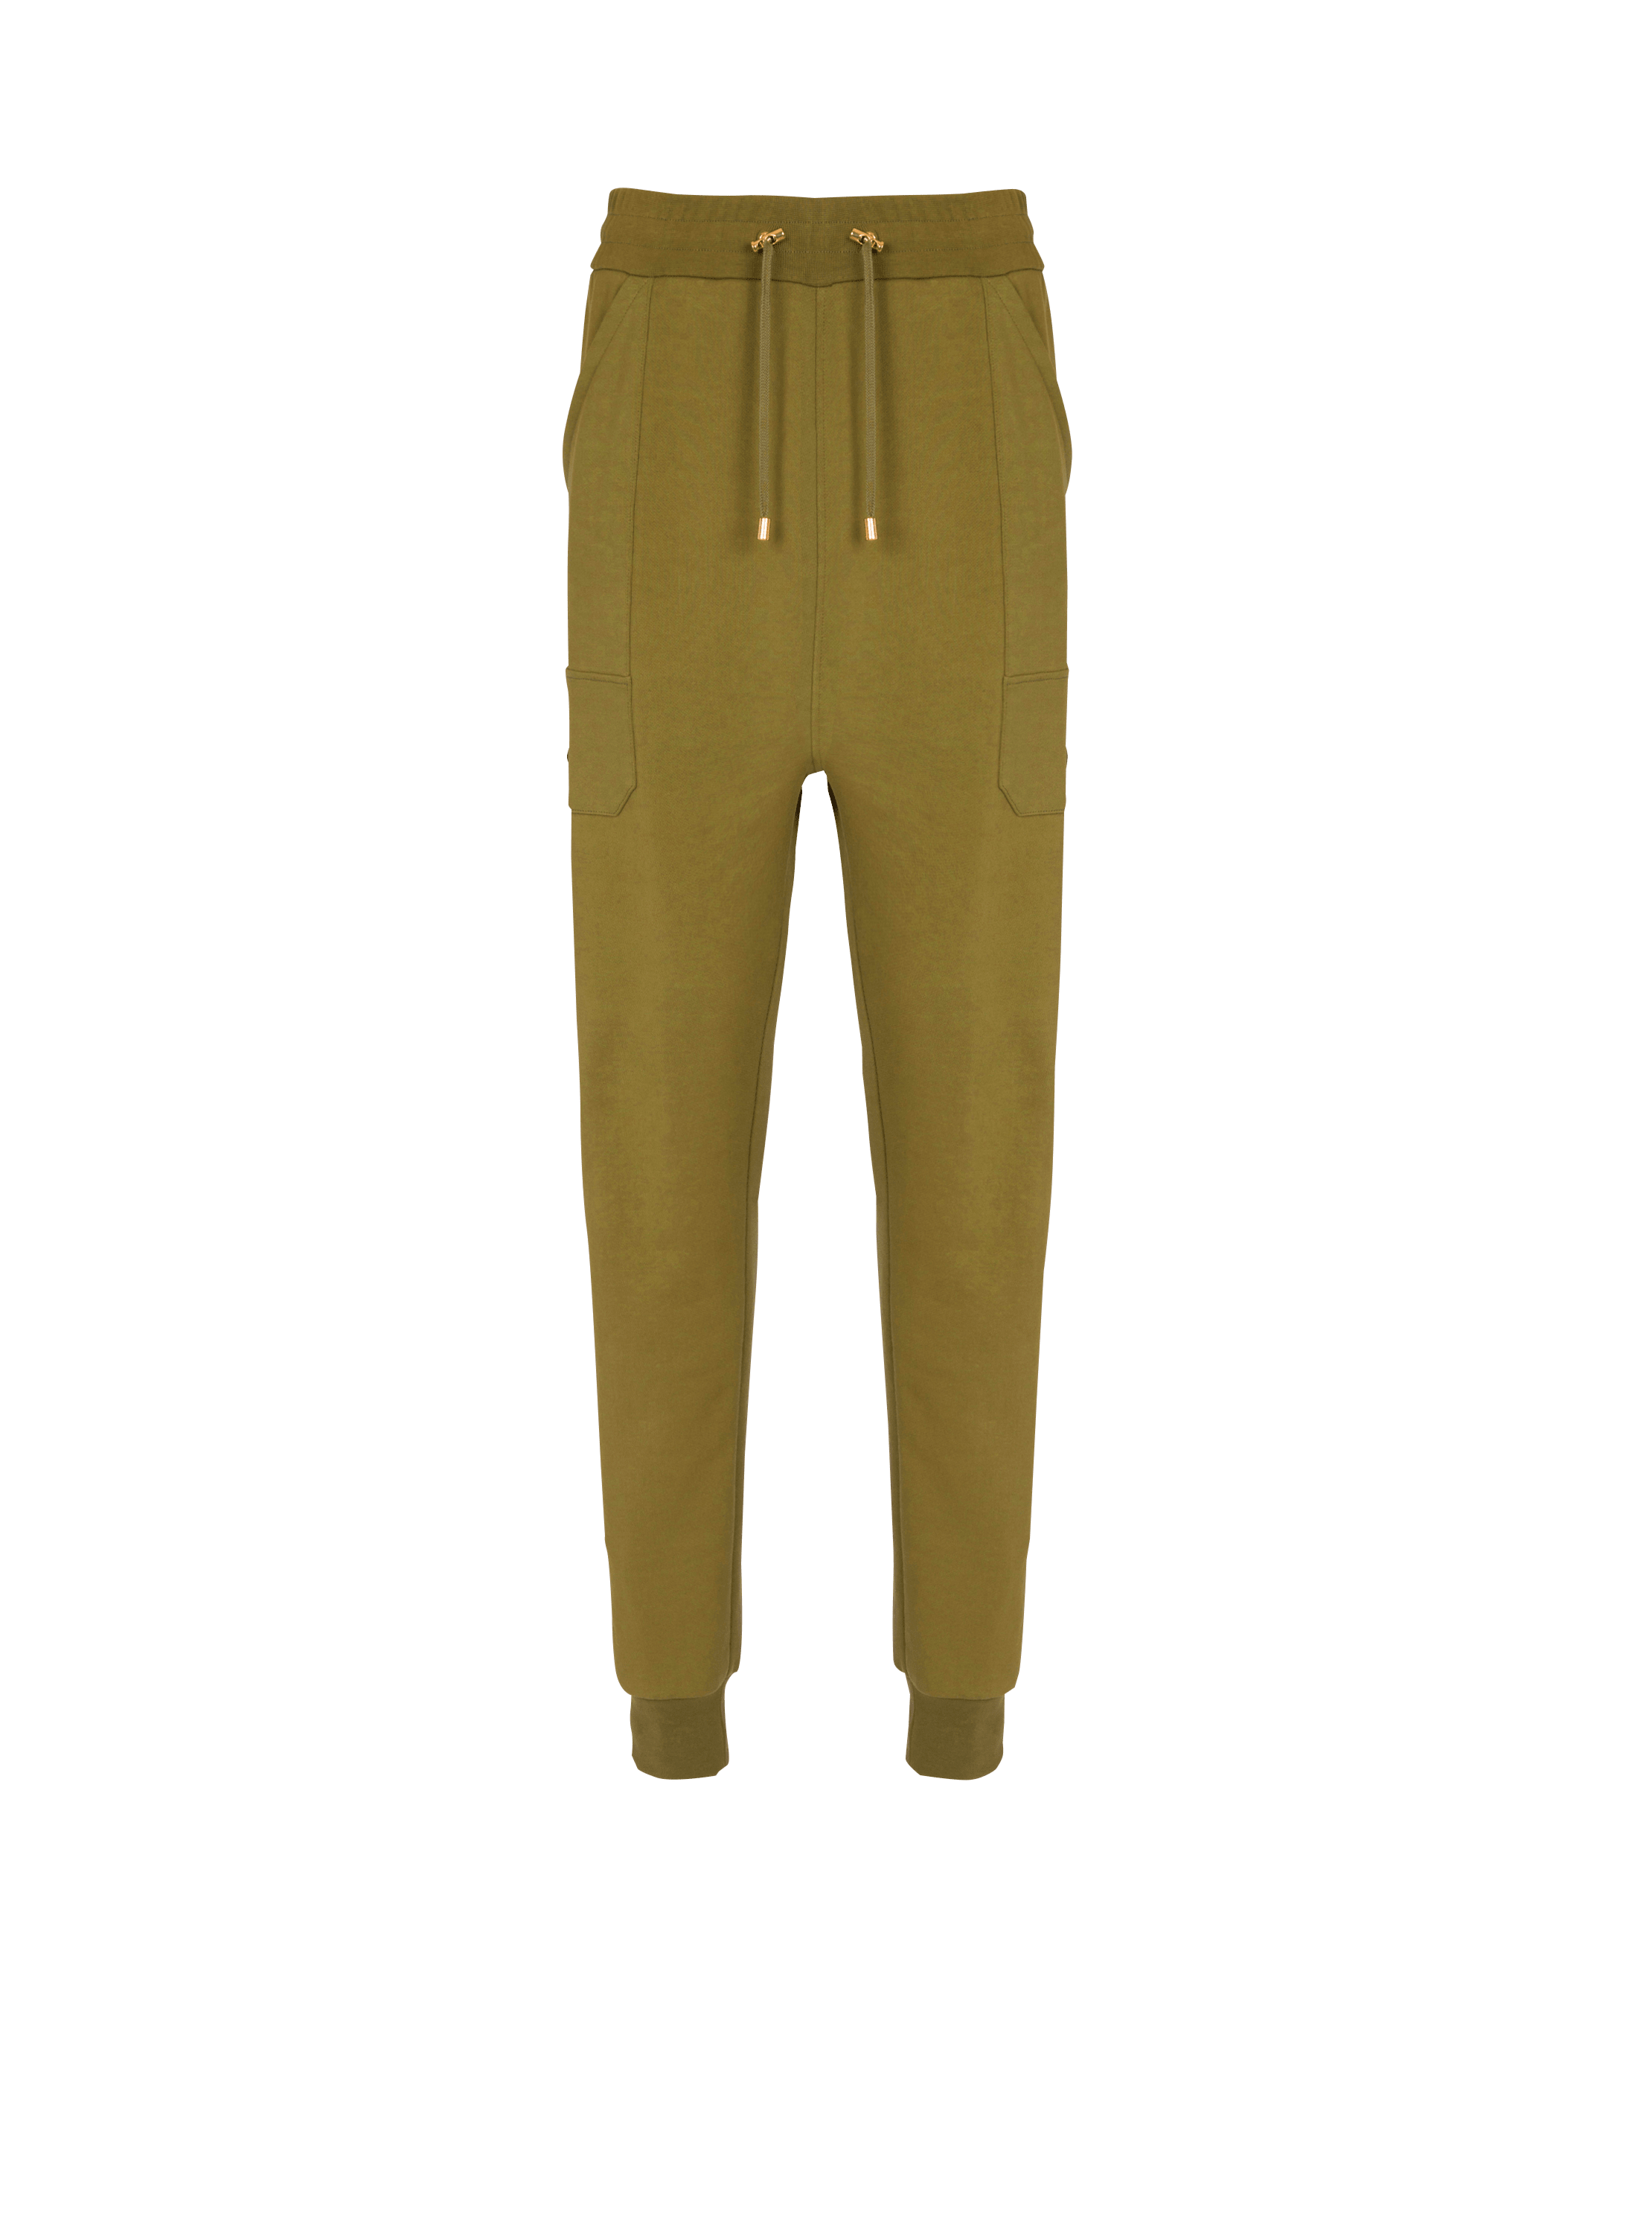 Jogging bottoms made from eco-responsible cotton